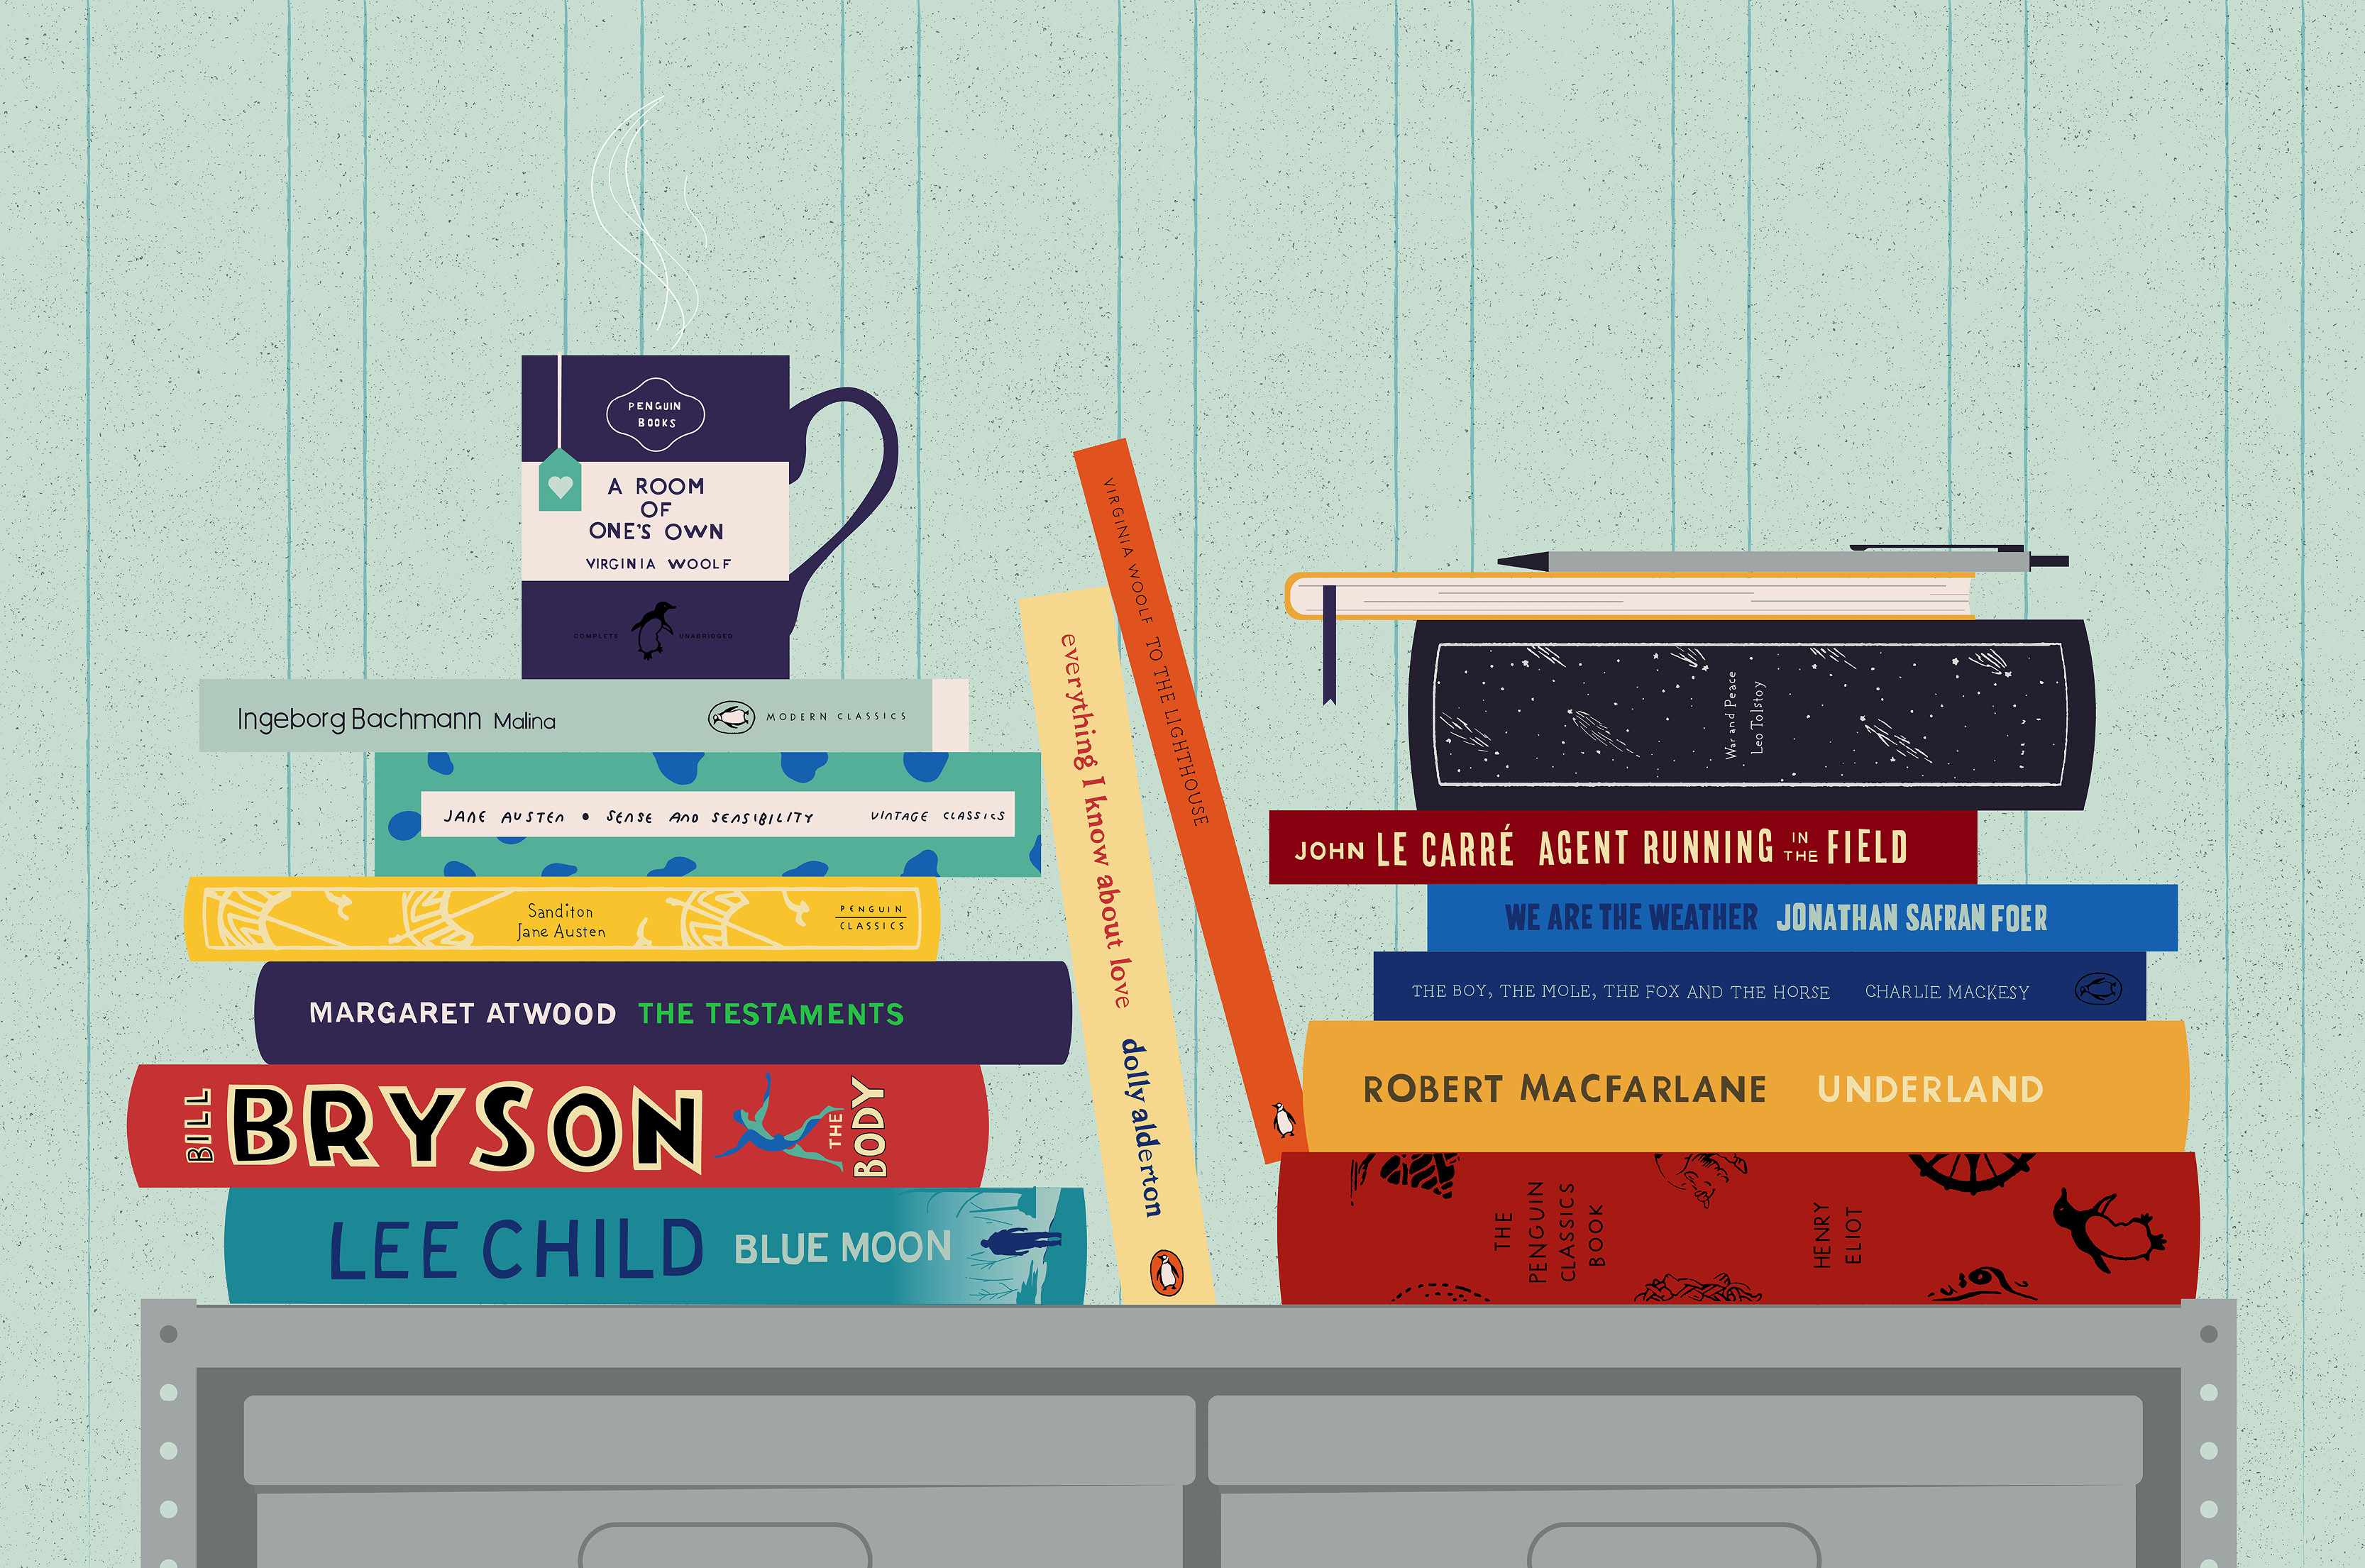 An illustration of a stack of books on a bookshelf.